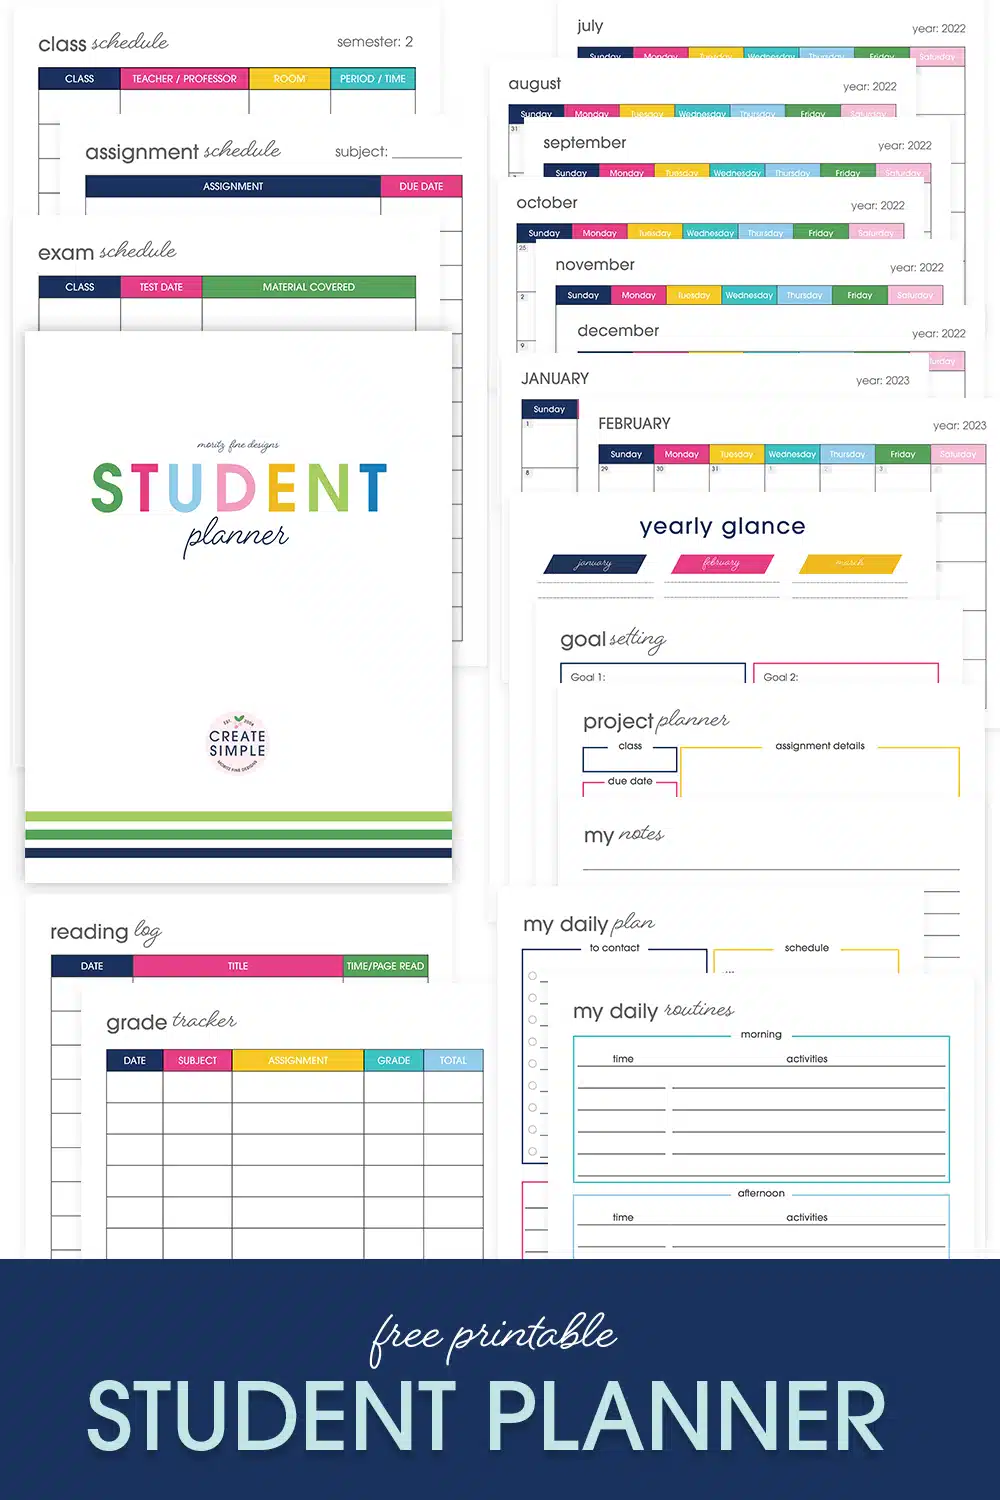 Keep your student organized this school year with the free printable Student Planner that's customizable for kids in all grades.